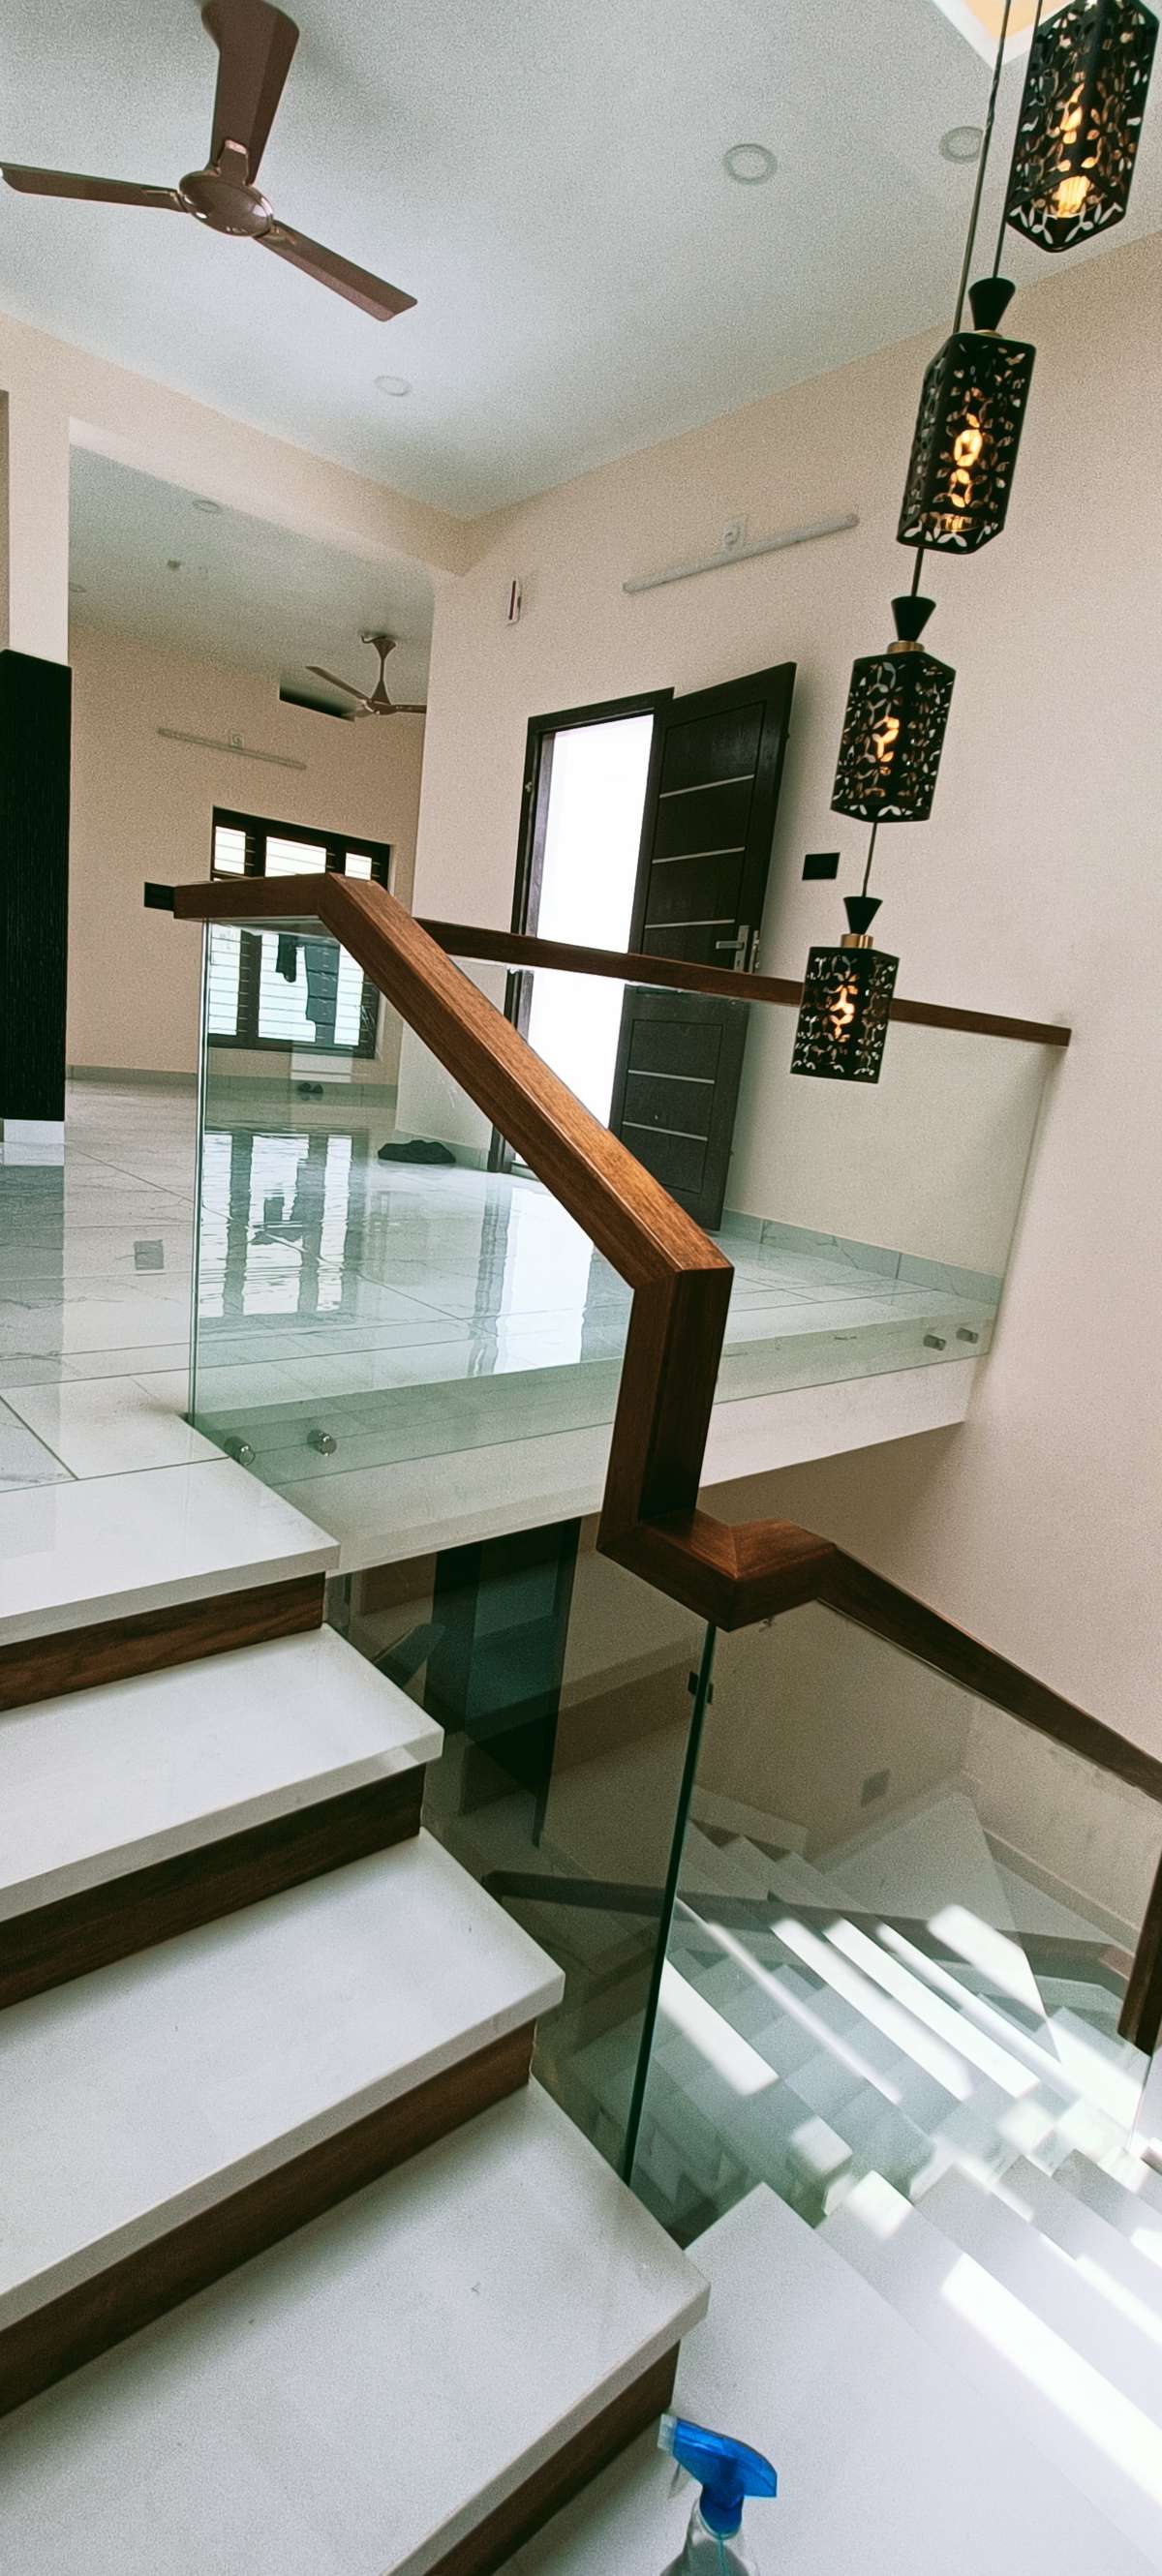 wood and glass #GlassHandRailStaircase
#premiumpots #StaircaseDecors #GlassStaircase